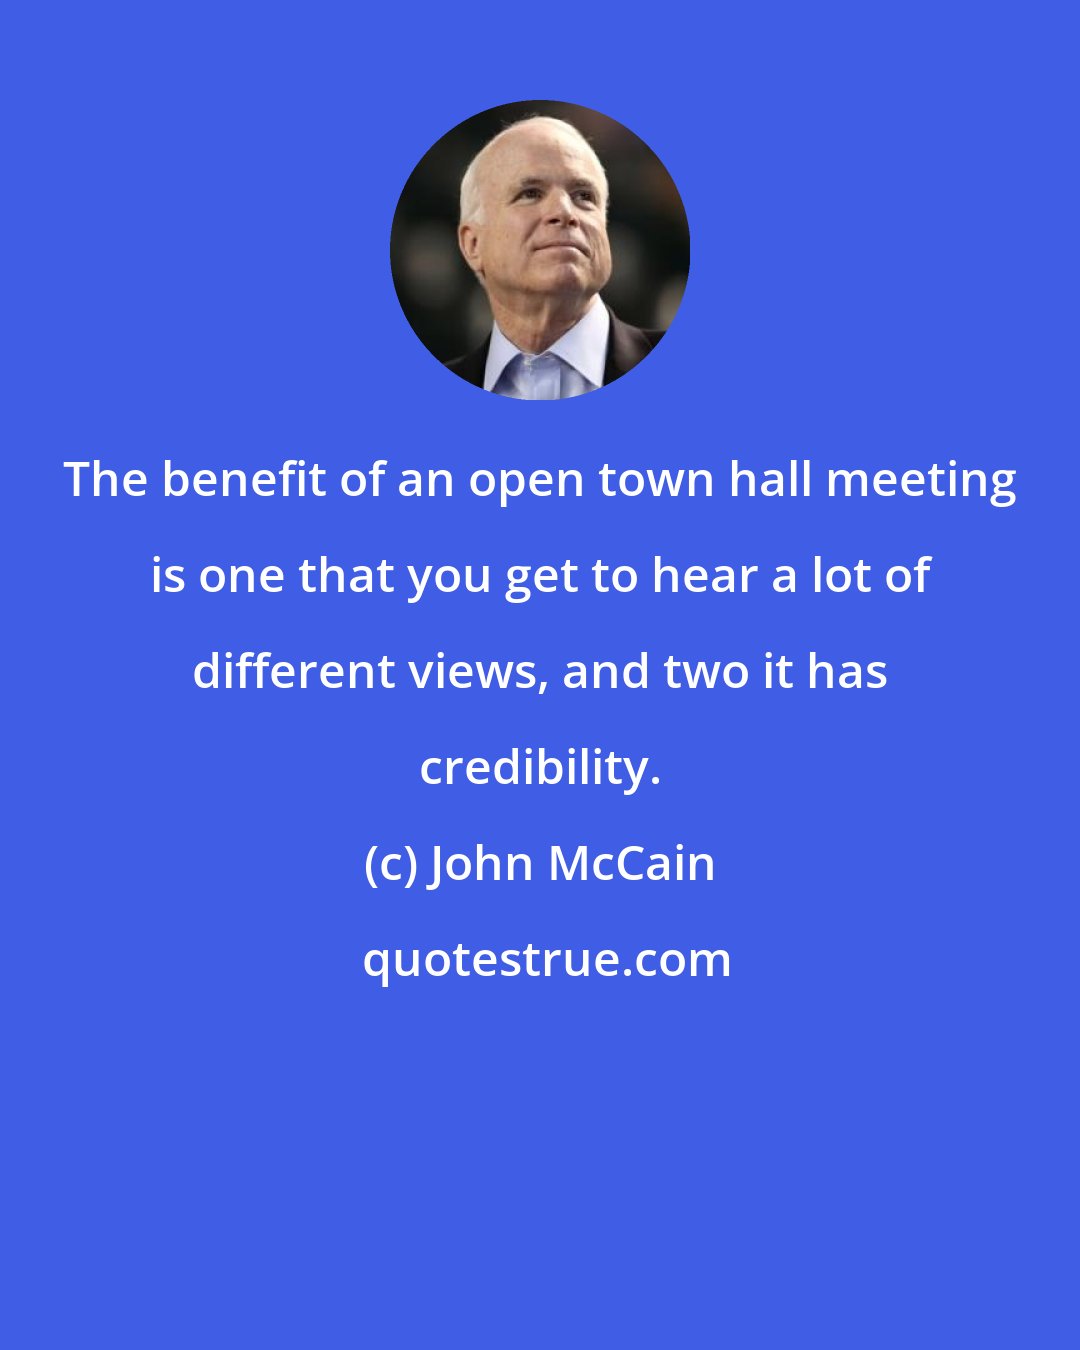 John McCain: The benefit of an open town hall meeting is one that you get to hear a lot of different views, and two it has credibility.